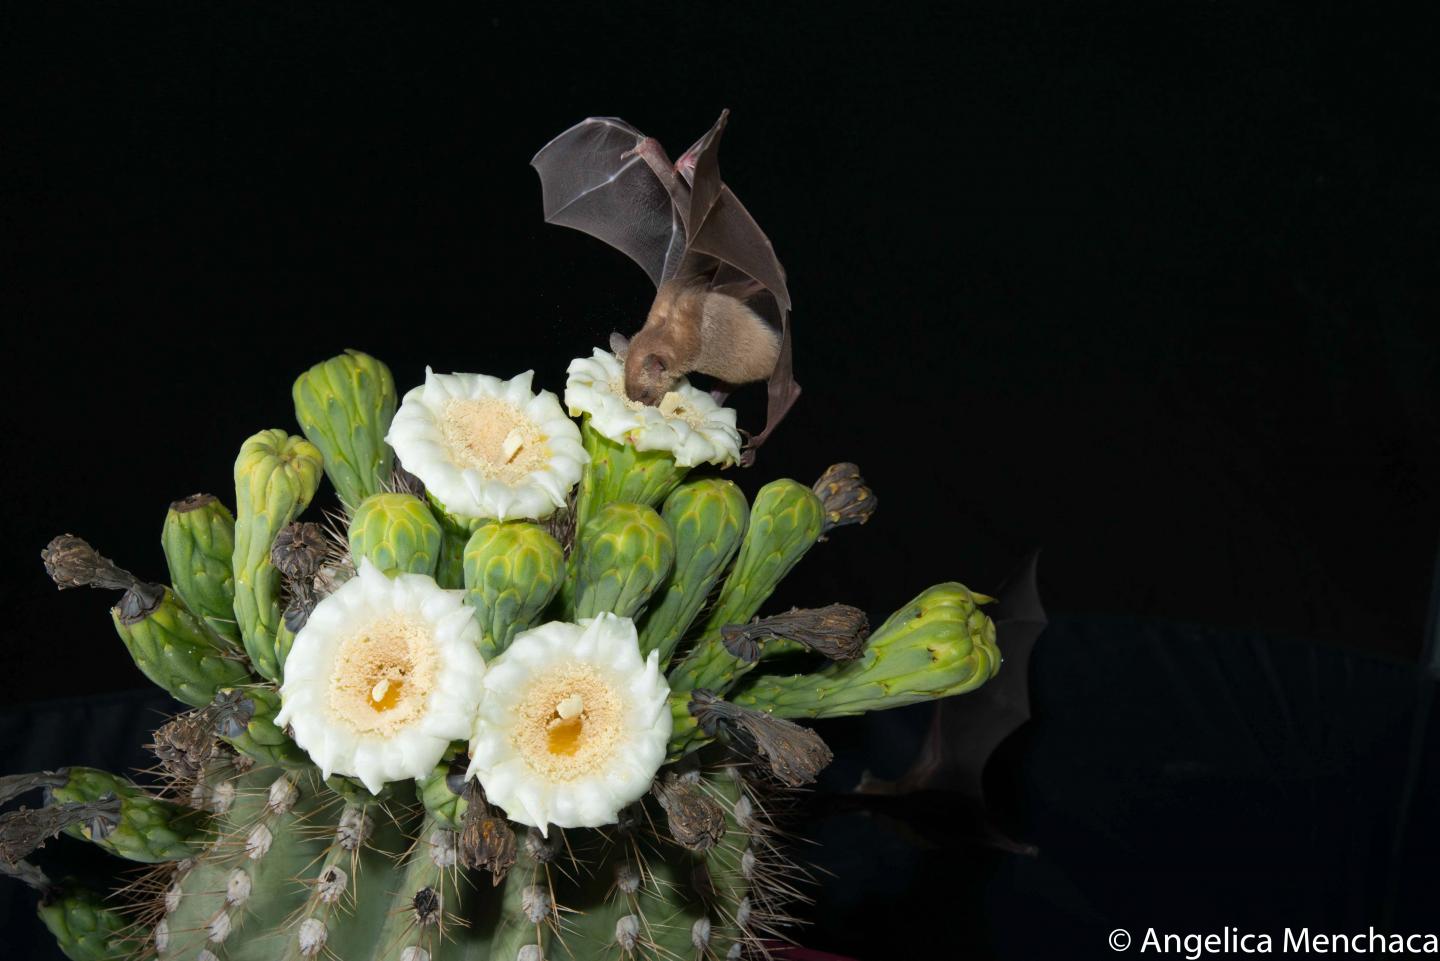 Tequila bat in the Sonoran Desert in Mexico